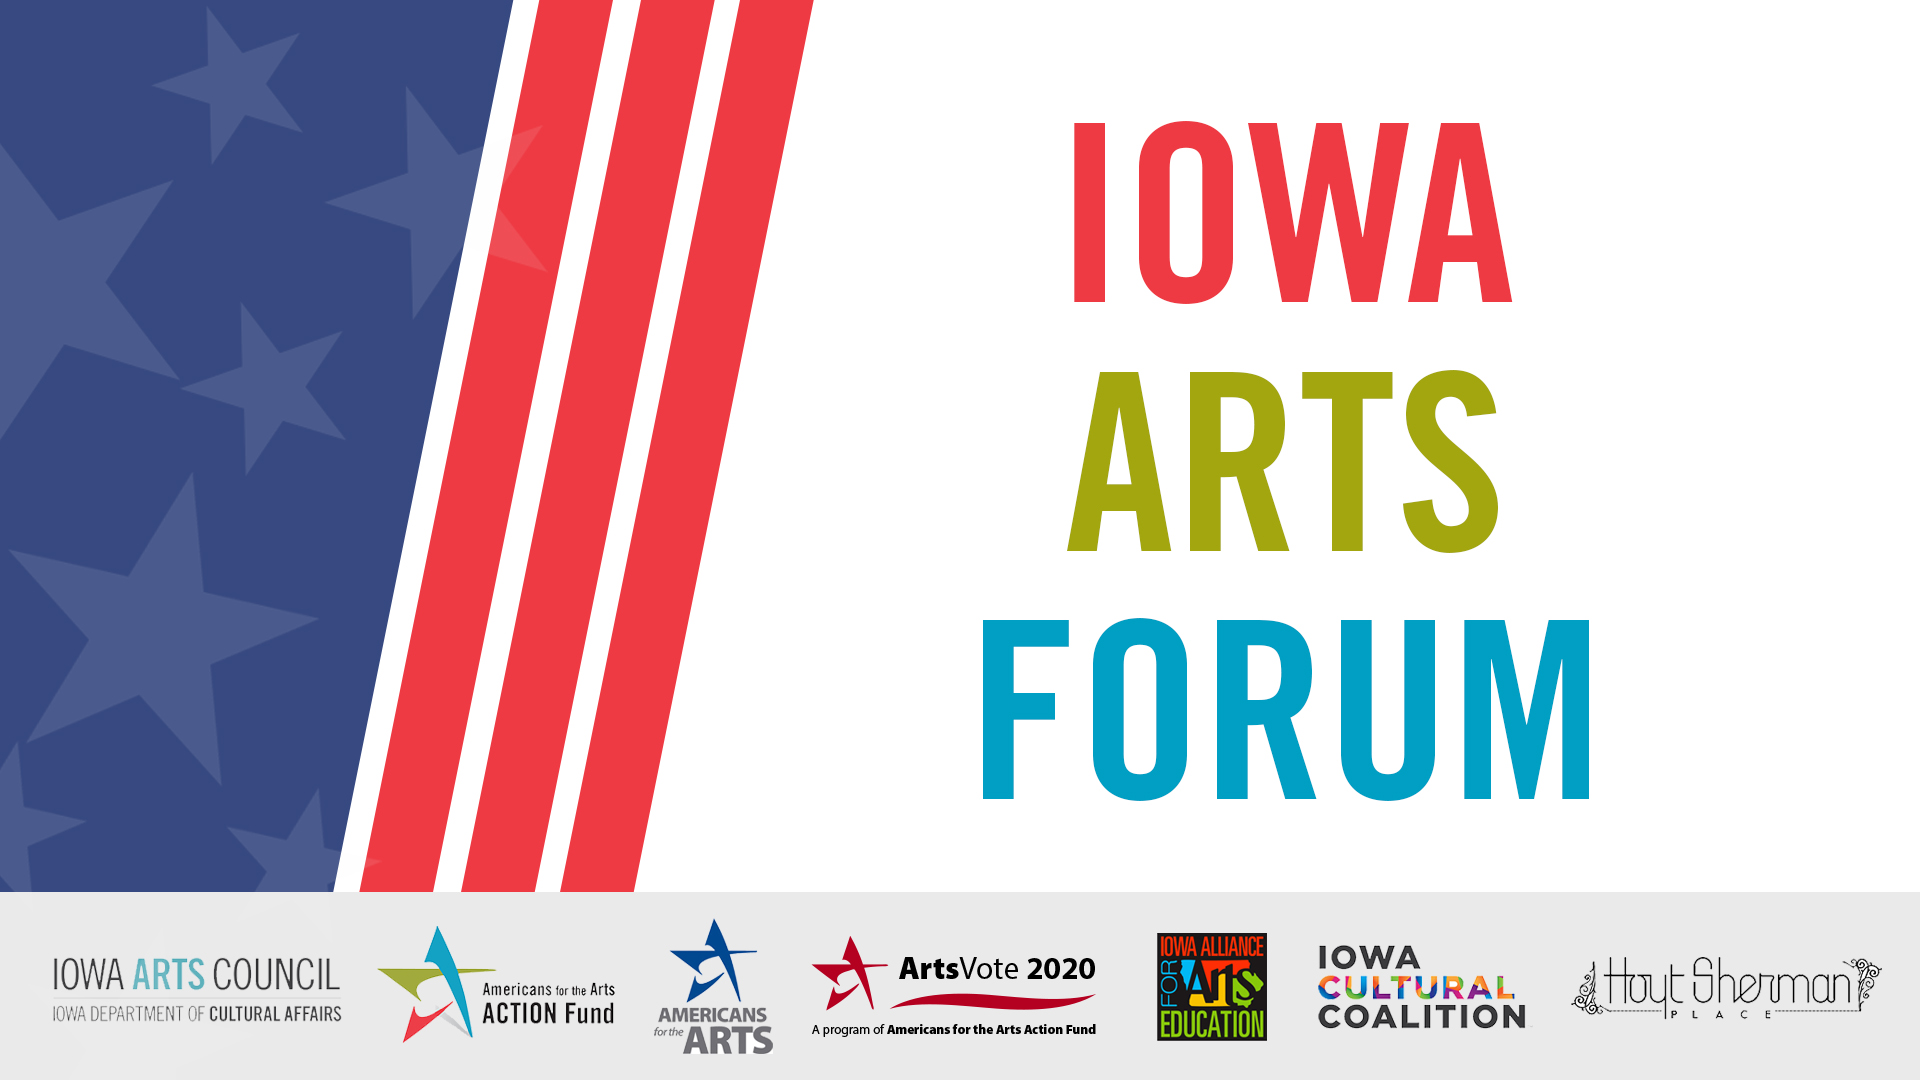 Iowa Arts Forum invites candidates and Iowans to focus on arts policy